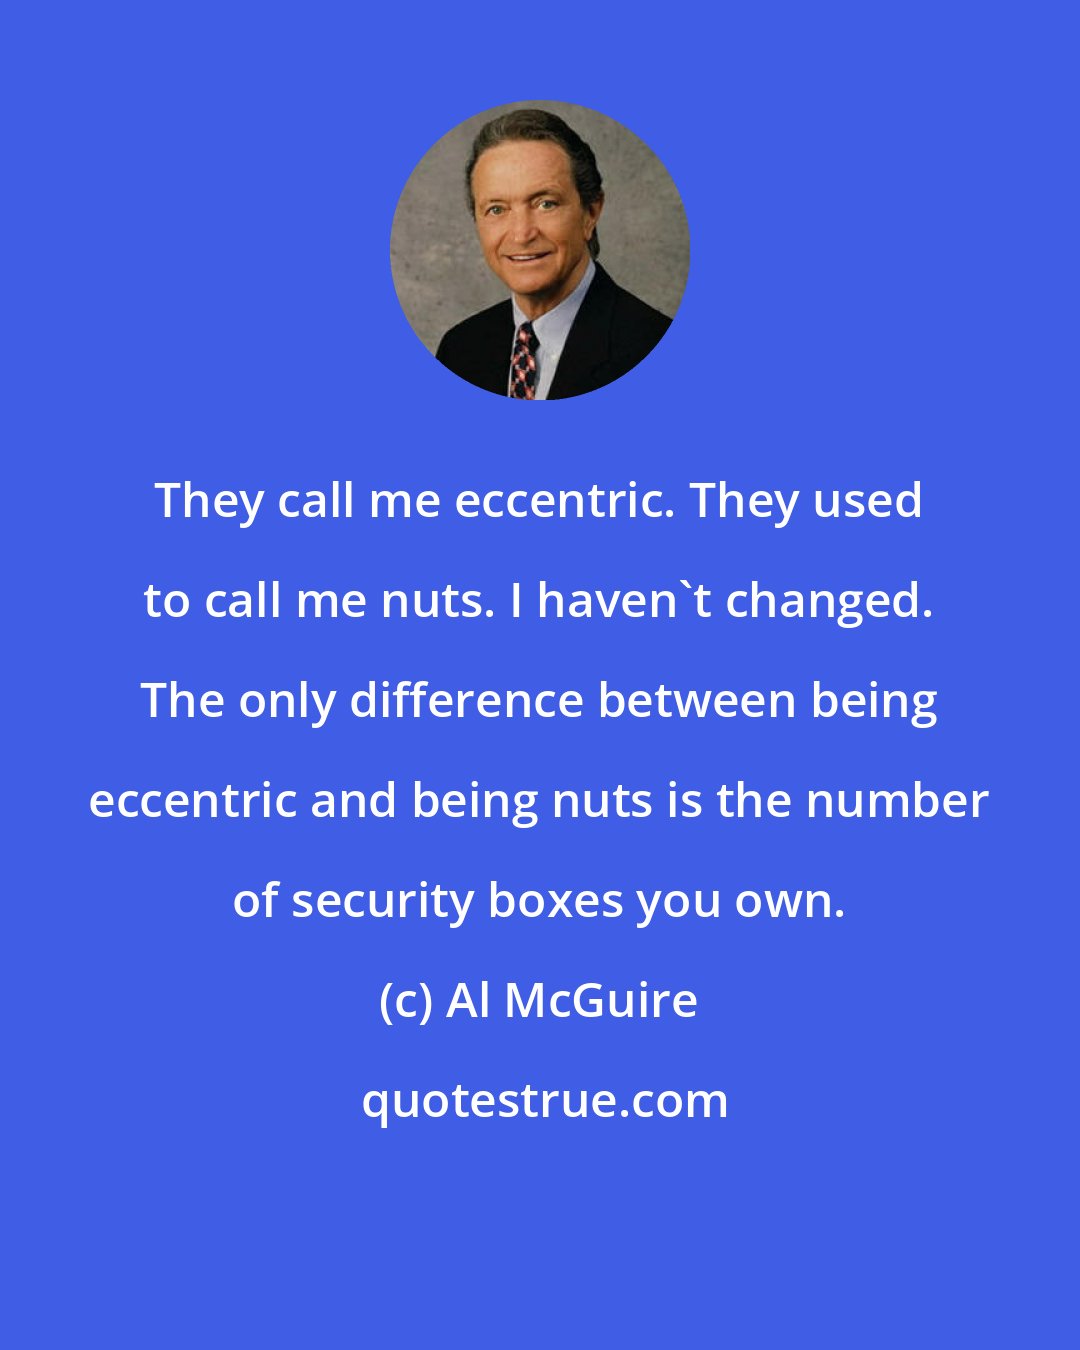 Al McGuire: They call me eccentric. They used to call me nuts. I haven't changed. The only difference between being eccentric and being nuts is the number of security boxes you own.